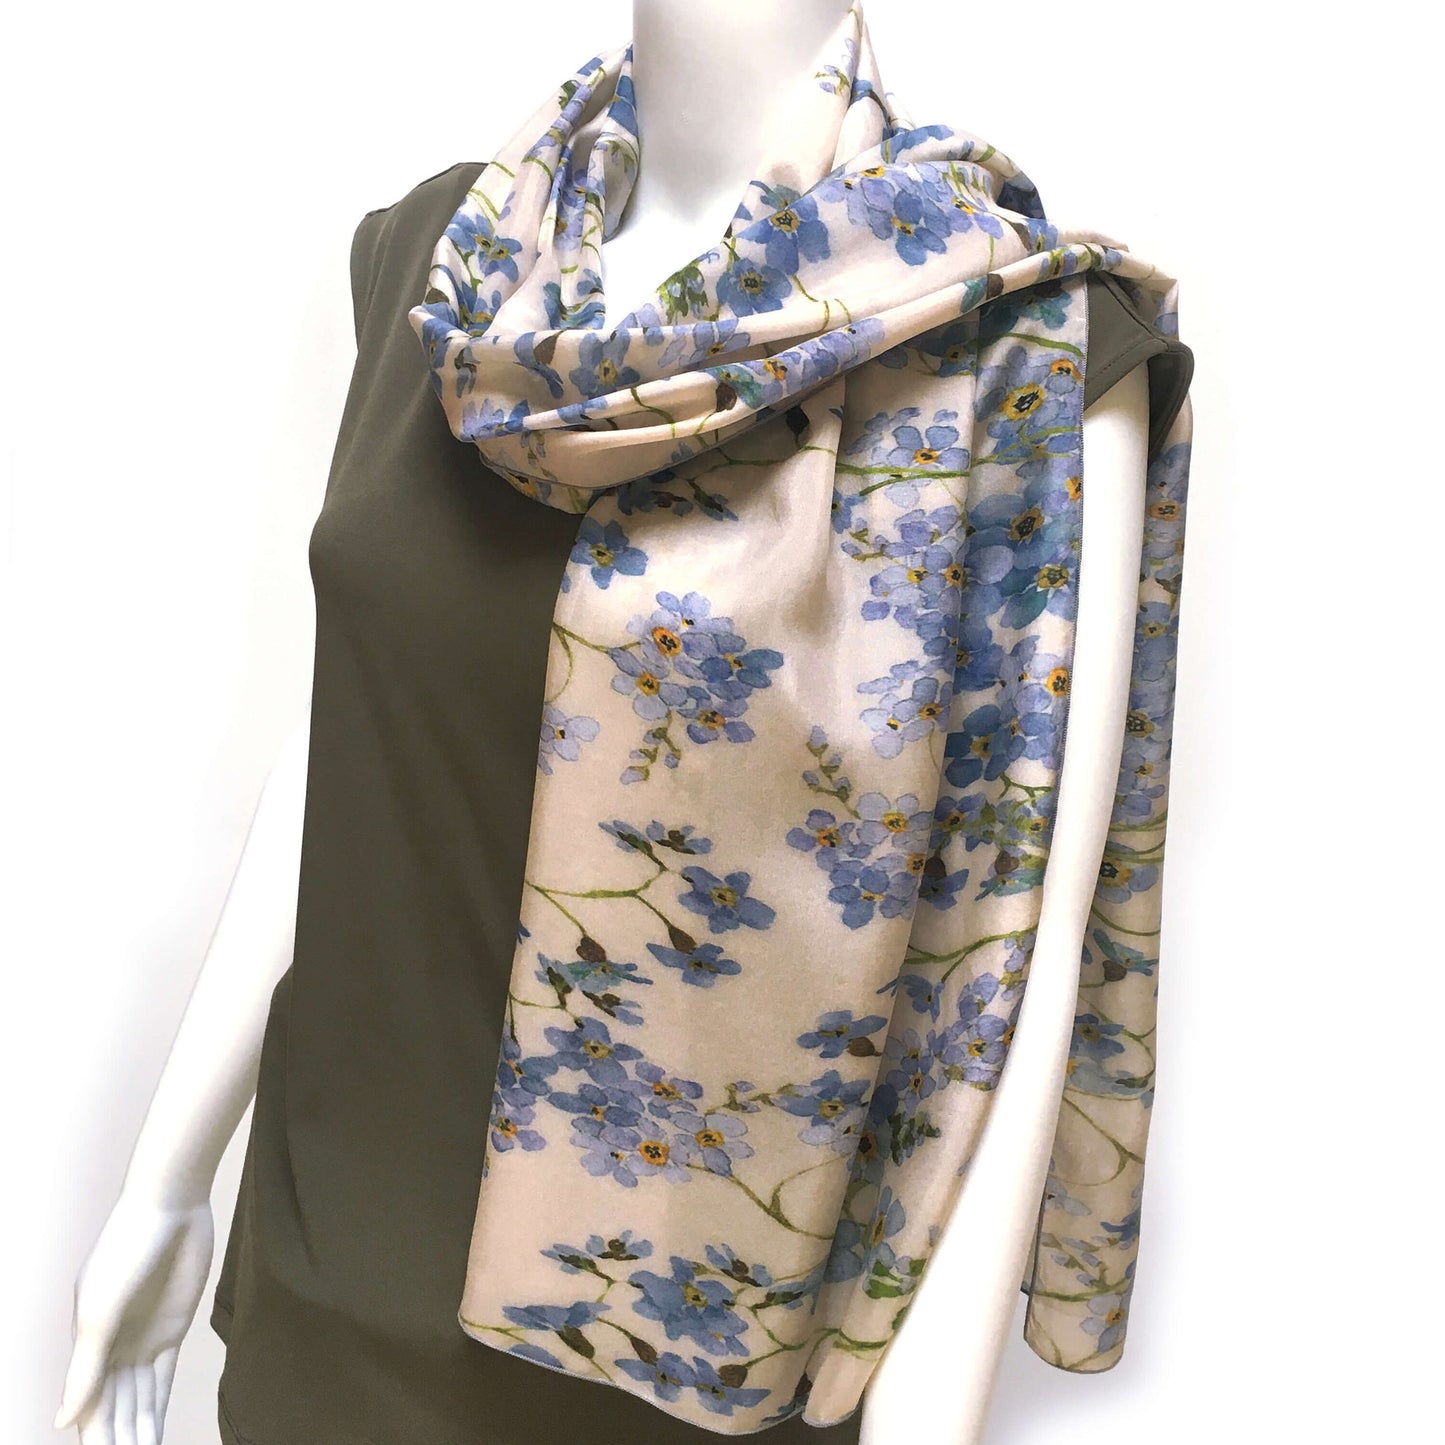 Forget-Me-Not Watercolor Pure Silk Scarf  72x16 ,Woman Scarf,  Lightweight Scarf,ladies scarf,Floral Scarf